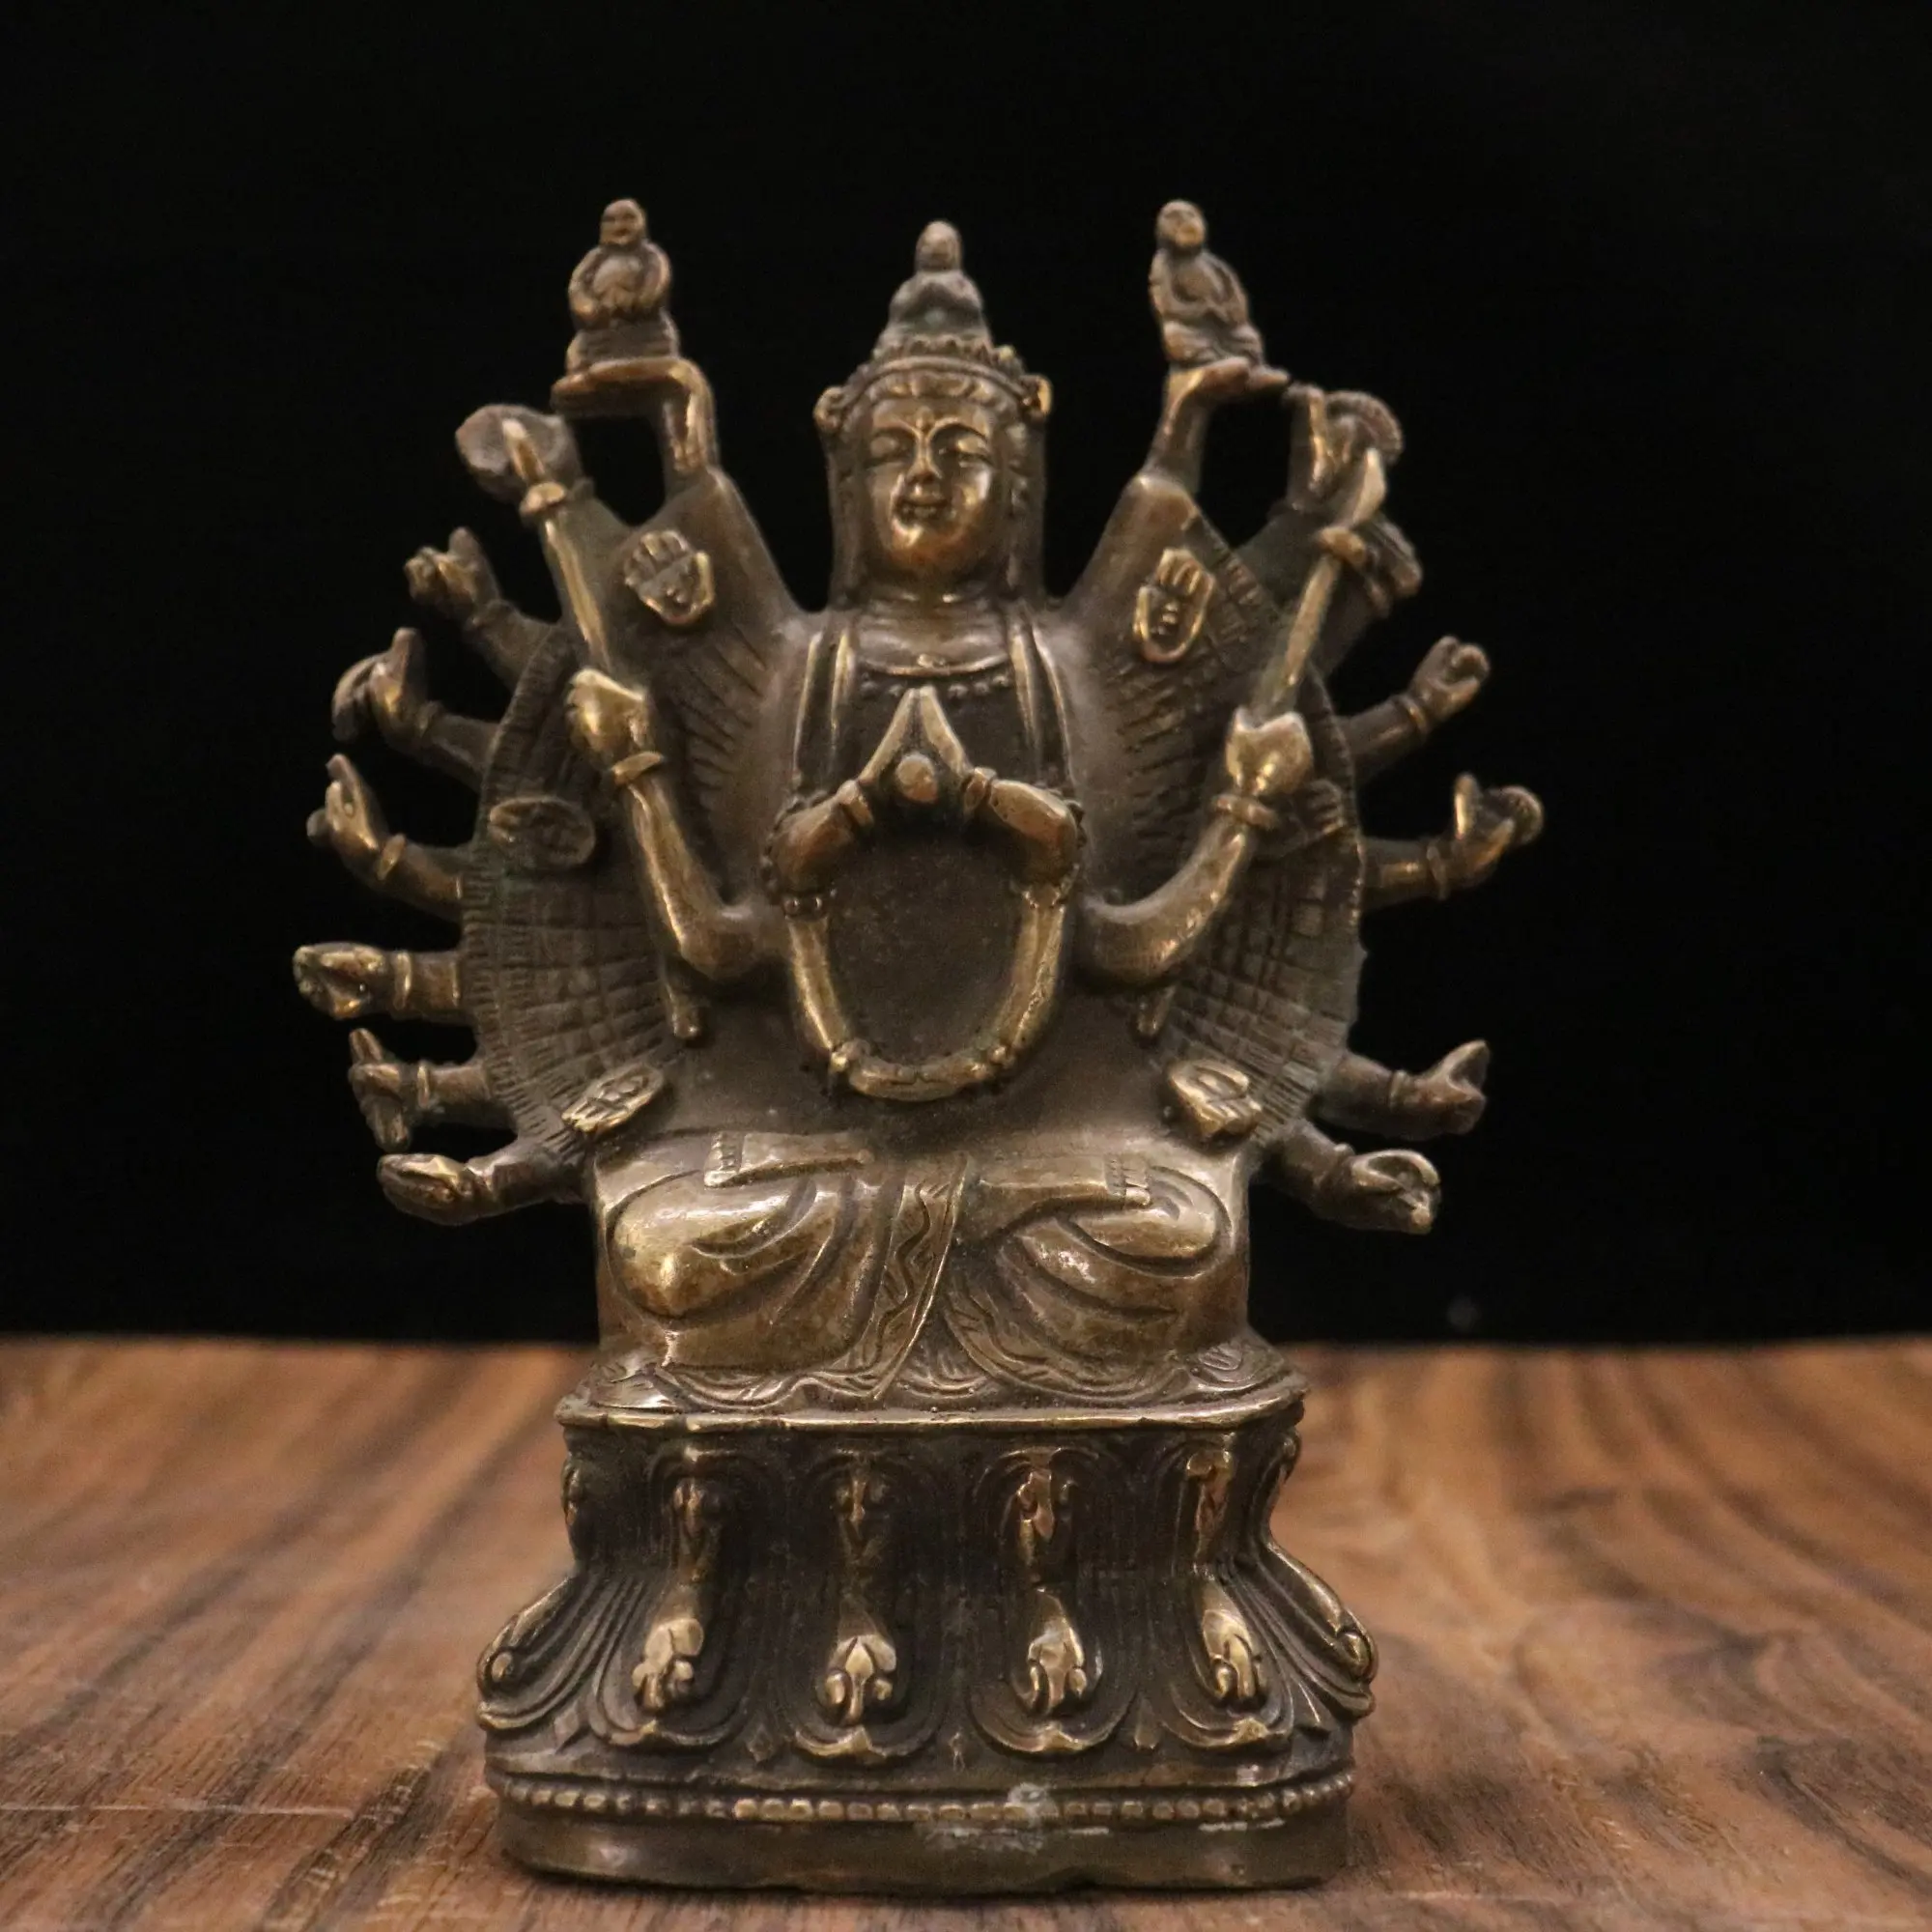 

7"Tibet Temple Collection Old Bronze Thousand-Hand Guanyin Bodhisattva Quasi tifomu Sitting Buddha Ornaments Town House Exorcism